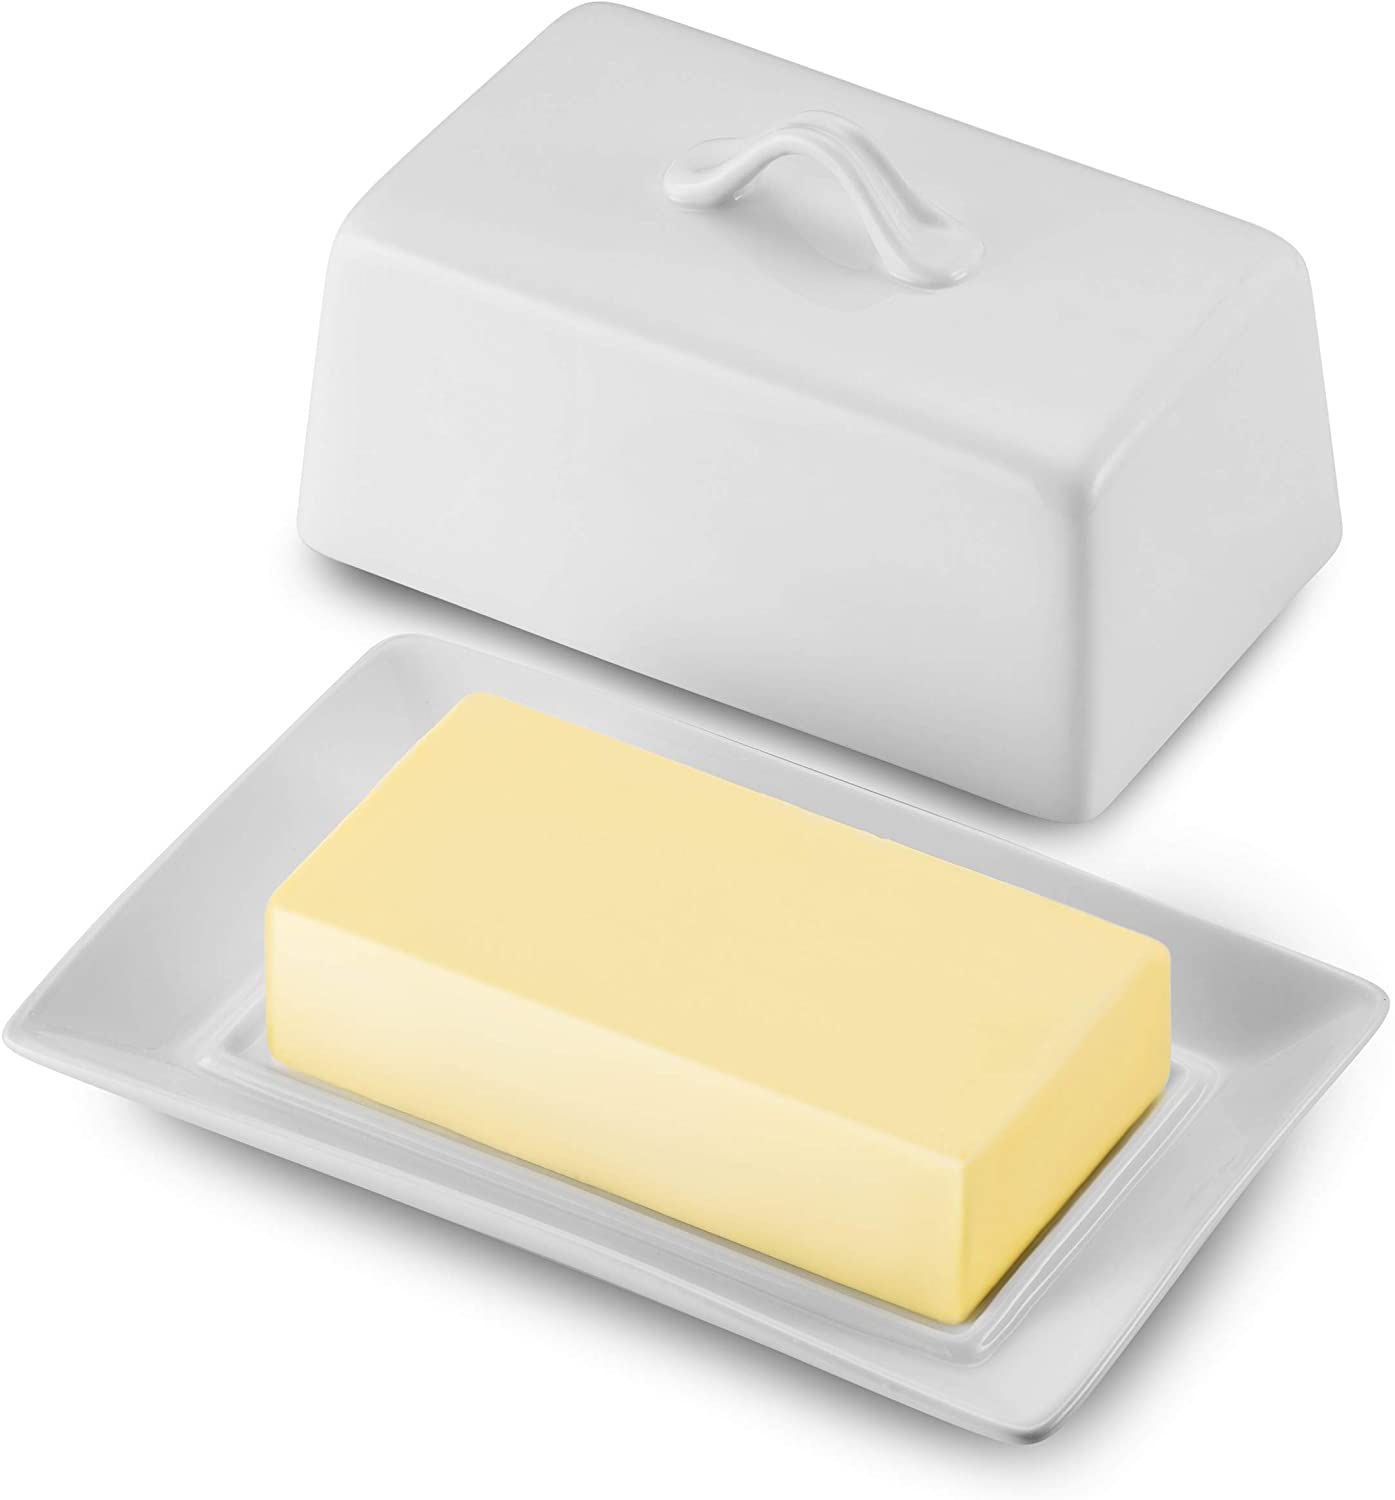 GOURMEX Large Butter Holder with Lid | Fits One Pound of Butter